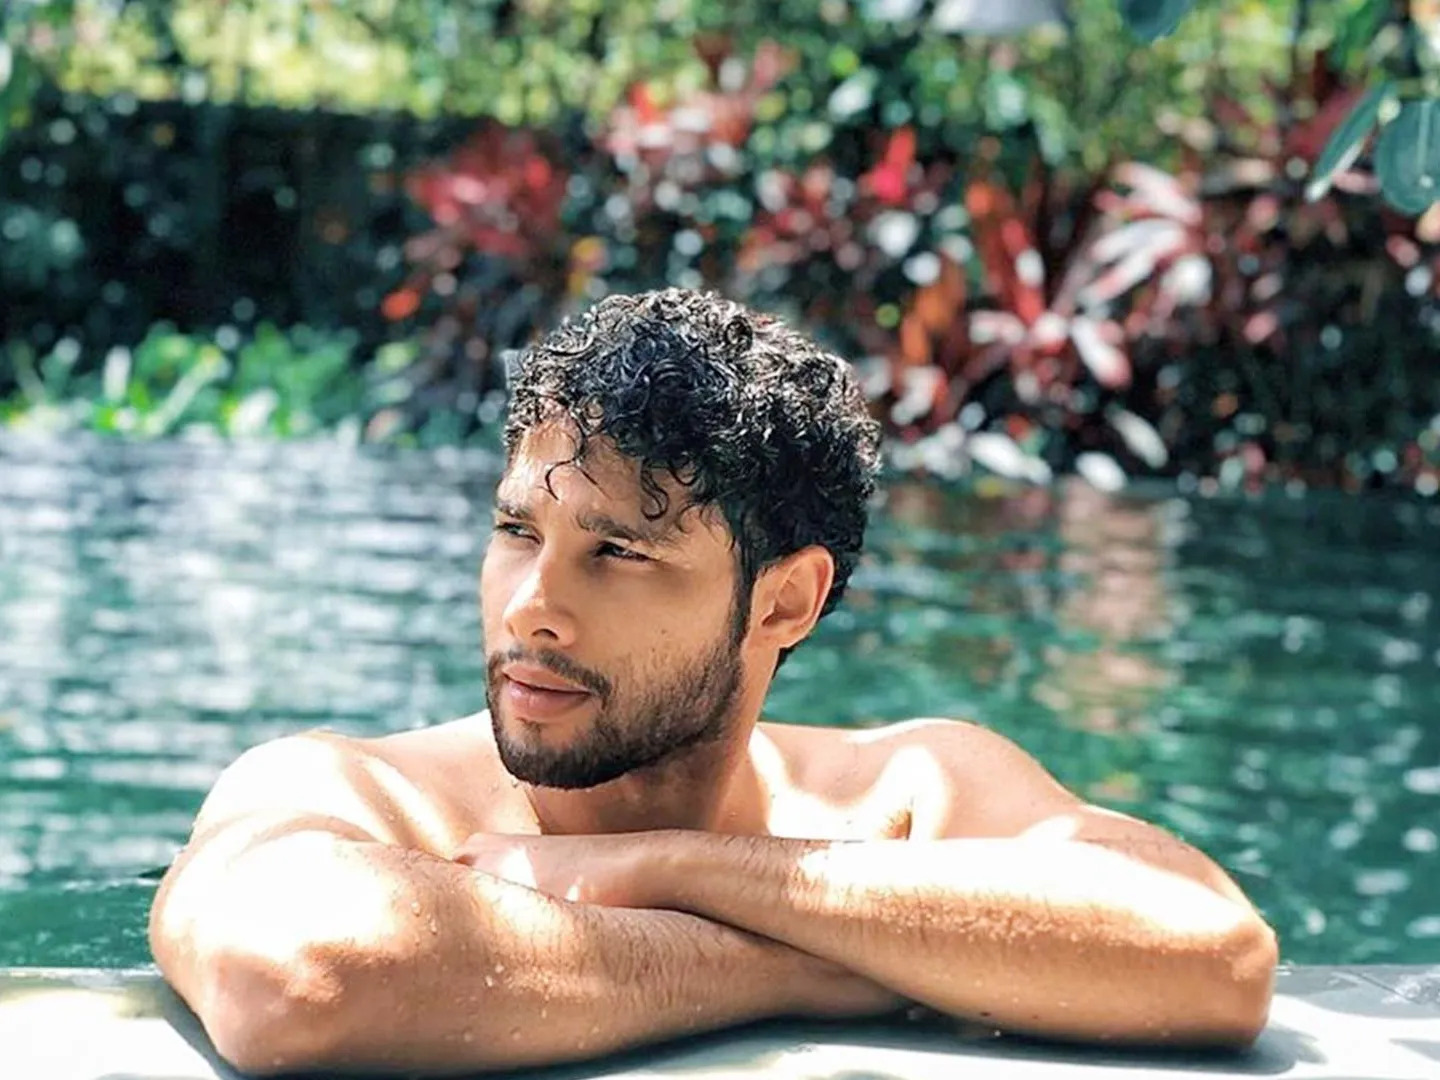 5 Looks Of Siddhant Chaturvedi That You Can Steal And Make It Look More Stunning